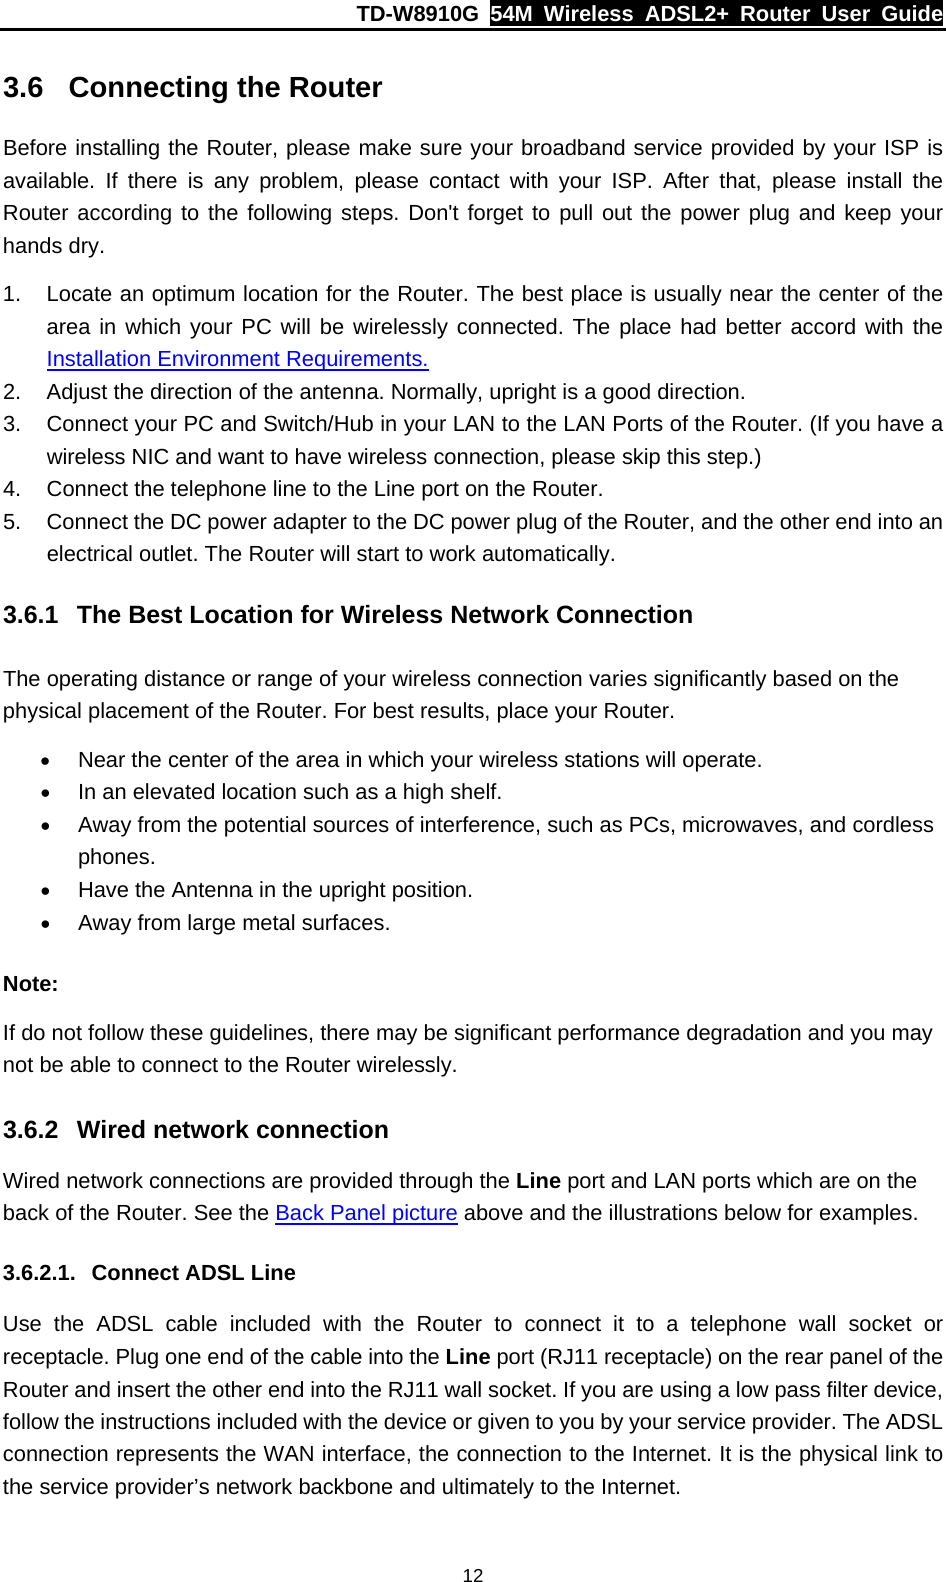 TD-W8910G  54M Wireless ADSL2+ Router User Guide  123.6  Connecting the Router Before installing the Router, please make sure your broadband service provided by your ISP is available. If there is any problem, please contact with your ISP. After that, please install the Router according to the following steps. Don&apos;t forget to pull out the power plug and keep your hands dry. 1.  Locate an optimum location for the Router. The best place is usually near the center of the area in which your PC will be wirelessly connected. The place had better accord with the Installation Environment Requirements. 2.  Adjust the direction of the antenna. Normally, upright is a good direction. 3.  Connect your PC and Switch/Hub in your LAN to the LAN Ports of the Router. (If you have a wireless NIC and want to have wireless connection, please skip this step.) 4.  Connect the telephone line to the Line port on the Router. 5.  Connect the DC power adapter to the DC power plug of the Router, and the other end into an electrical outlet. The Router will start to work automatically. 3.6.1  The Best Location for Wireless Network Connection The operating distance or range of your wireless connection varies significantly based on the physical placement of the Router. For best results, place your Router. • Near the center of the area in which your wireless stations will operate. • In an elevated location such as a high shelf. • Away from the potential sources of interference, such as PCs, microwaves, and cordless phones. • Have the Antenna in the upright position. • Away from large metal surfaces. Note: If do not follow these guidelines, there may be significant performance degradation and you may not be able to connect to the Router wirelessly. 3.6.2  Wired network connection Wired network connections are provided through the Line port and LAN ports which are on the back of the Router. See the Back Panel picture above and the illustrations below for examples. 3.6.2.1.  Connect ADSL Line Use the ADSL cable included with the Router to connect it to a telephone wall socket or receptacle. Plug one end of the cable into the Line port (RJ11 receptacle) on the rear panel of the Router and insert the other end into the RJ11 wall socket. If you are using a low pass filter device, follow the instructions included with the device or given to you by your service provider. The ADSL connection represents the WAN interface, the connection to the Internet. It is the physical link to the service provider’s network backbone and ultimately to the Internet. 